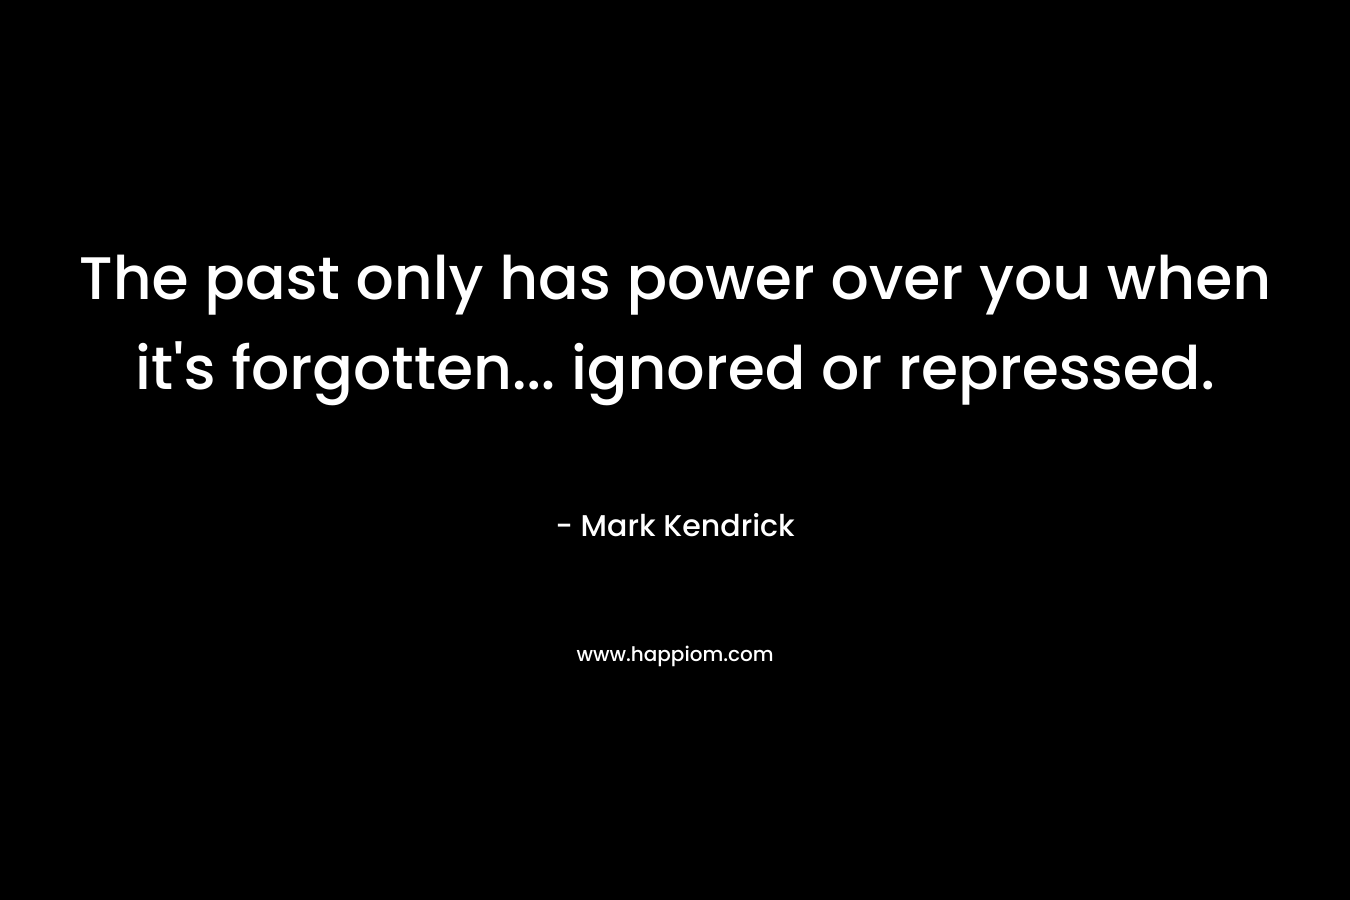 The past only has power over you when it’s forgotten… ignored or repressed. – Mark Kendrick